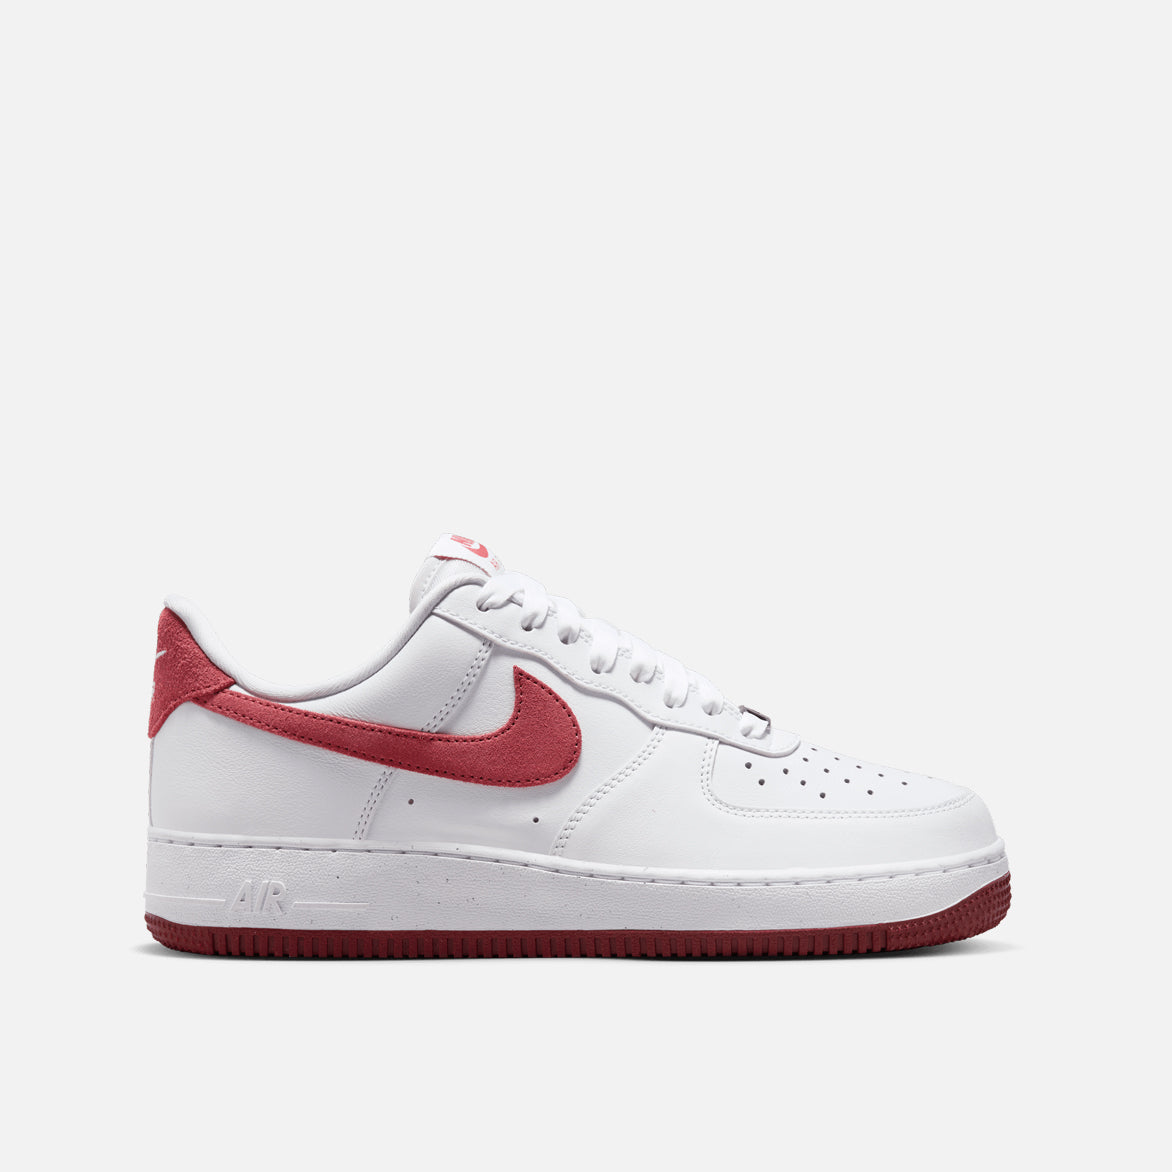 WMNS AIR FORCE 1 `07 "VALENTINE'S DAY"